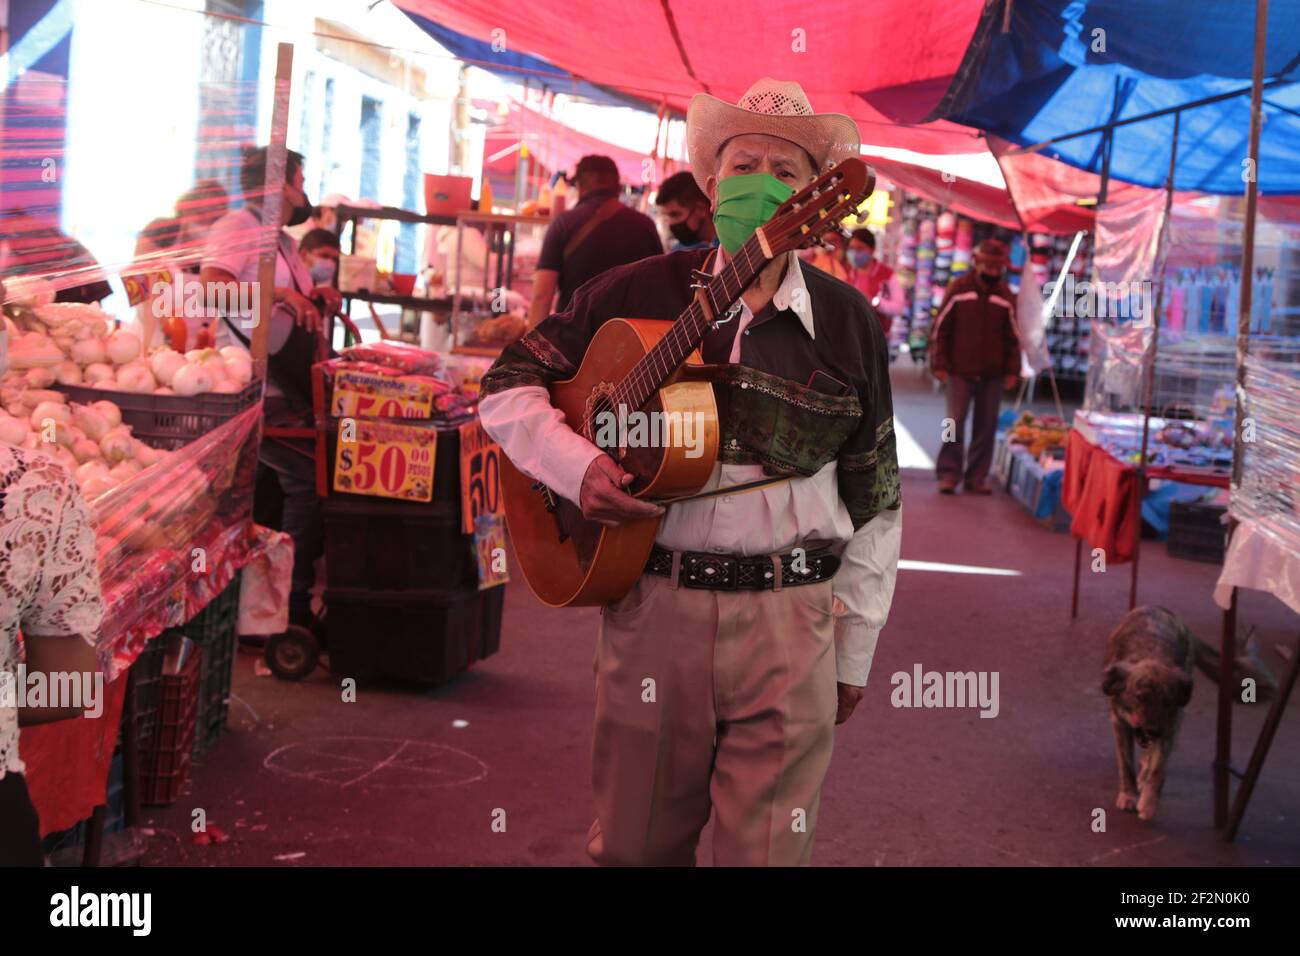 MEXICO CITY, MEXICO - MARCH 12: A musician walks in an outdoor market amid Orange Epidemiological semaphore of Covid-19. Authorities has allowed the reopening of outdoor markets, following safety protocols. On March 12, 2021 in Mexico City, Mexico. (Photo by Eyepix/Sipa USA) Stock Photo